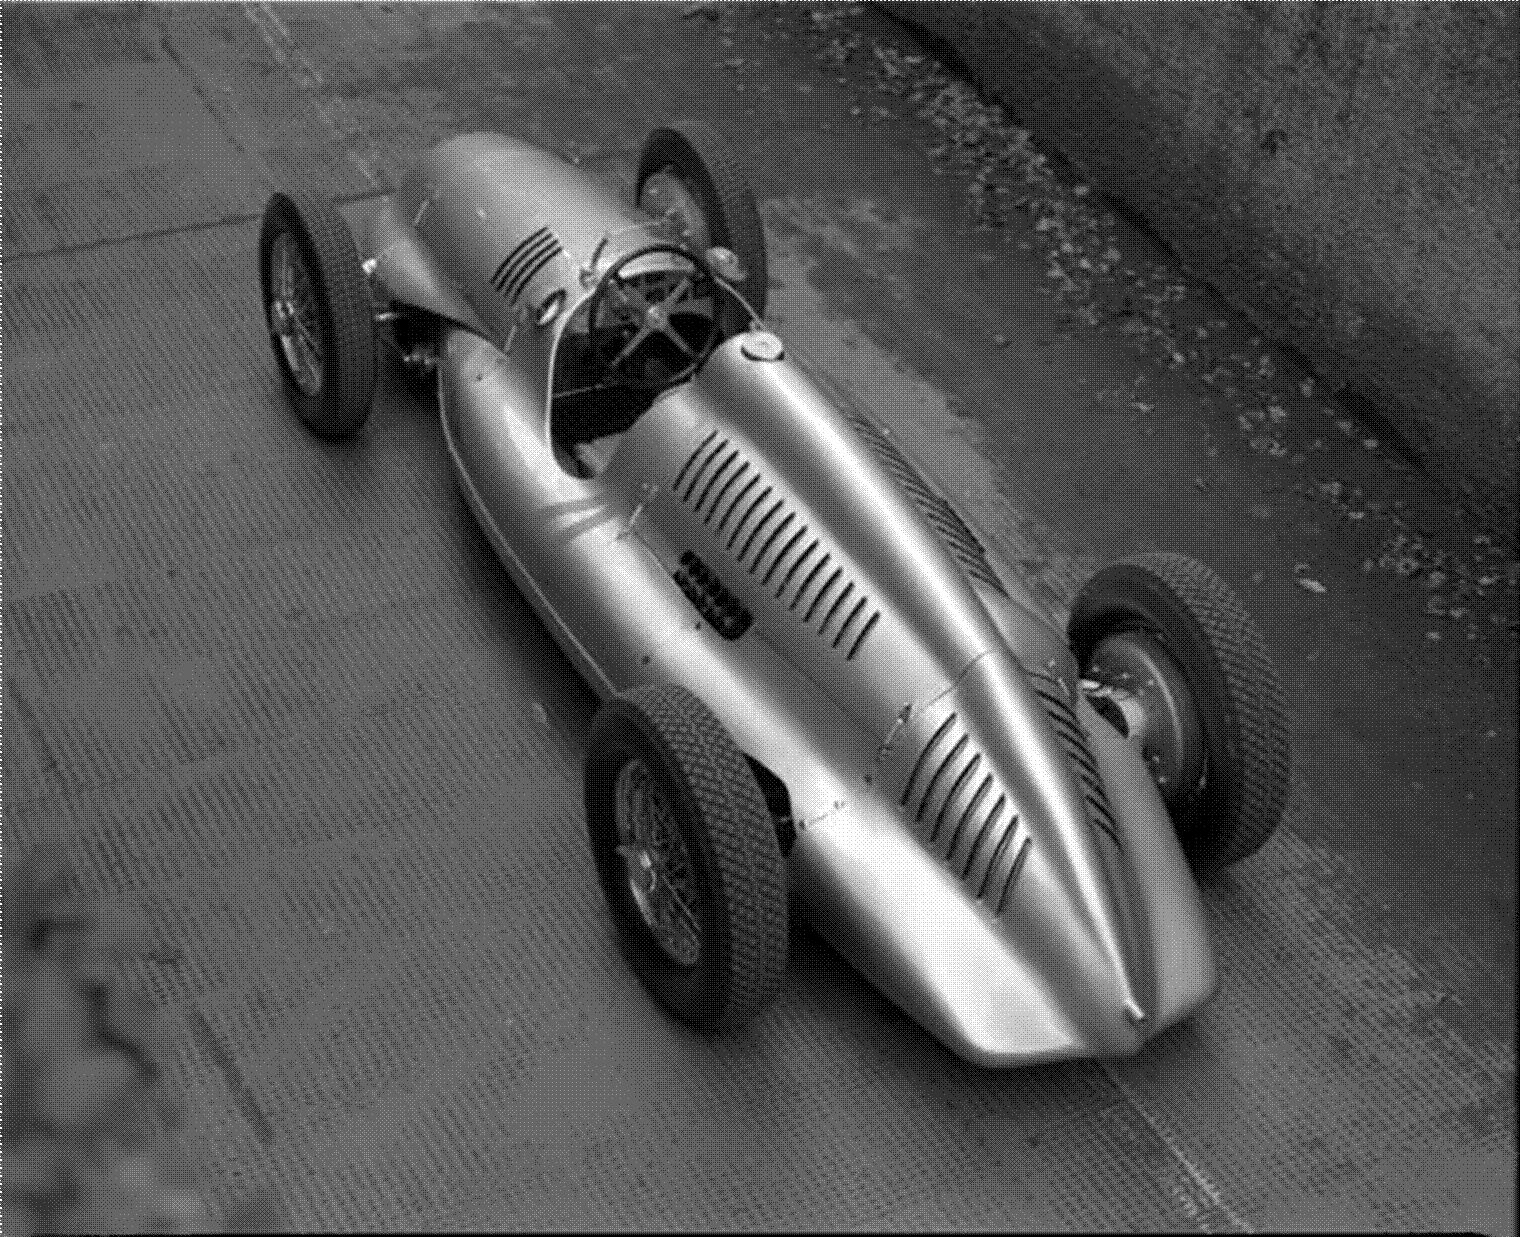 Auto Union Type C. Grand Prix racing cars types A to D were